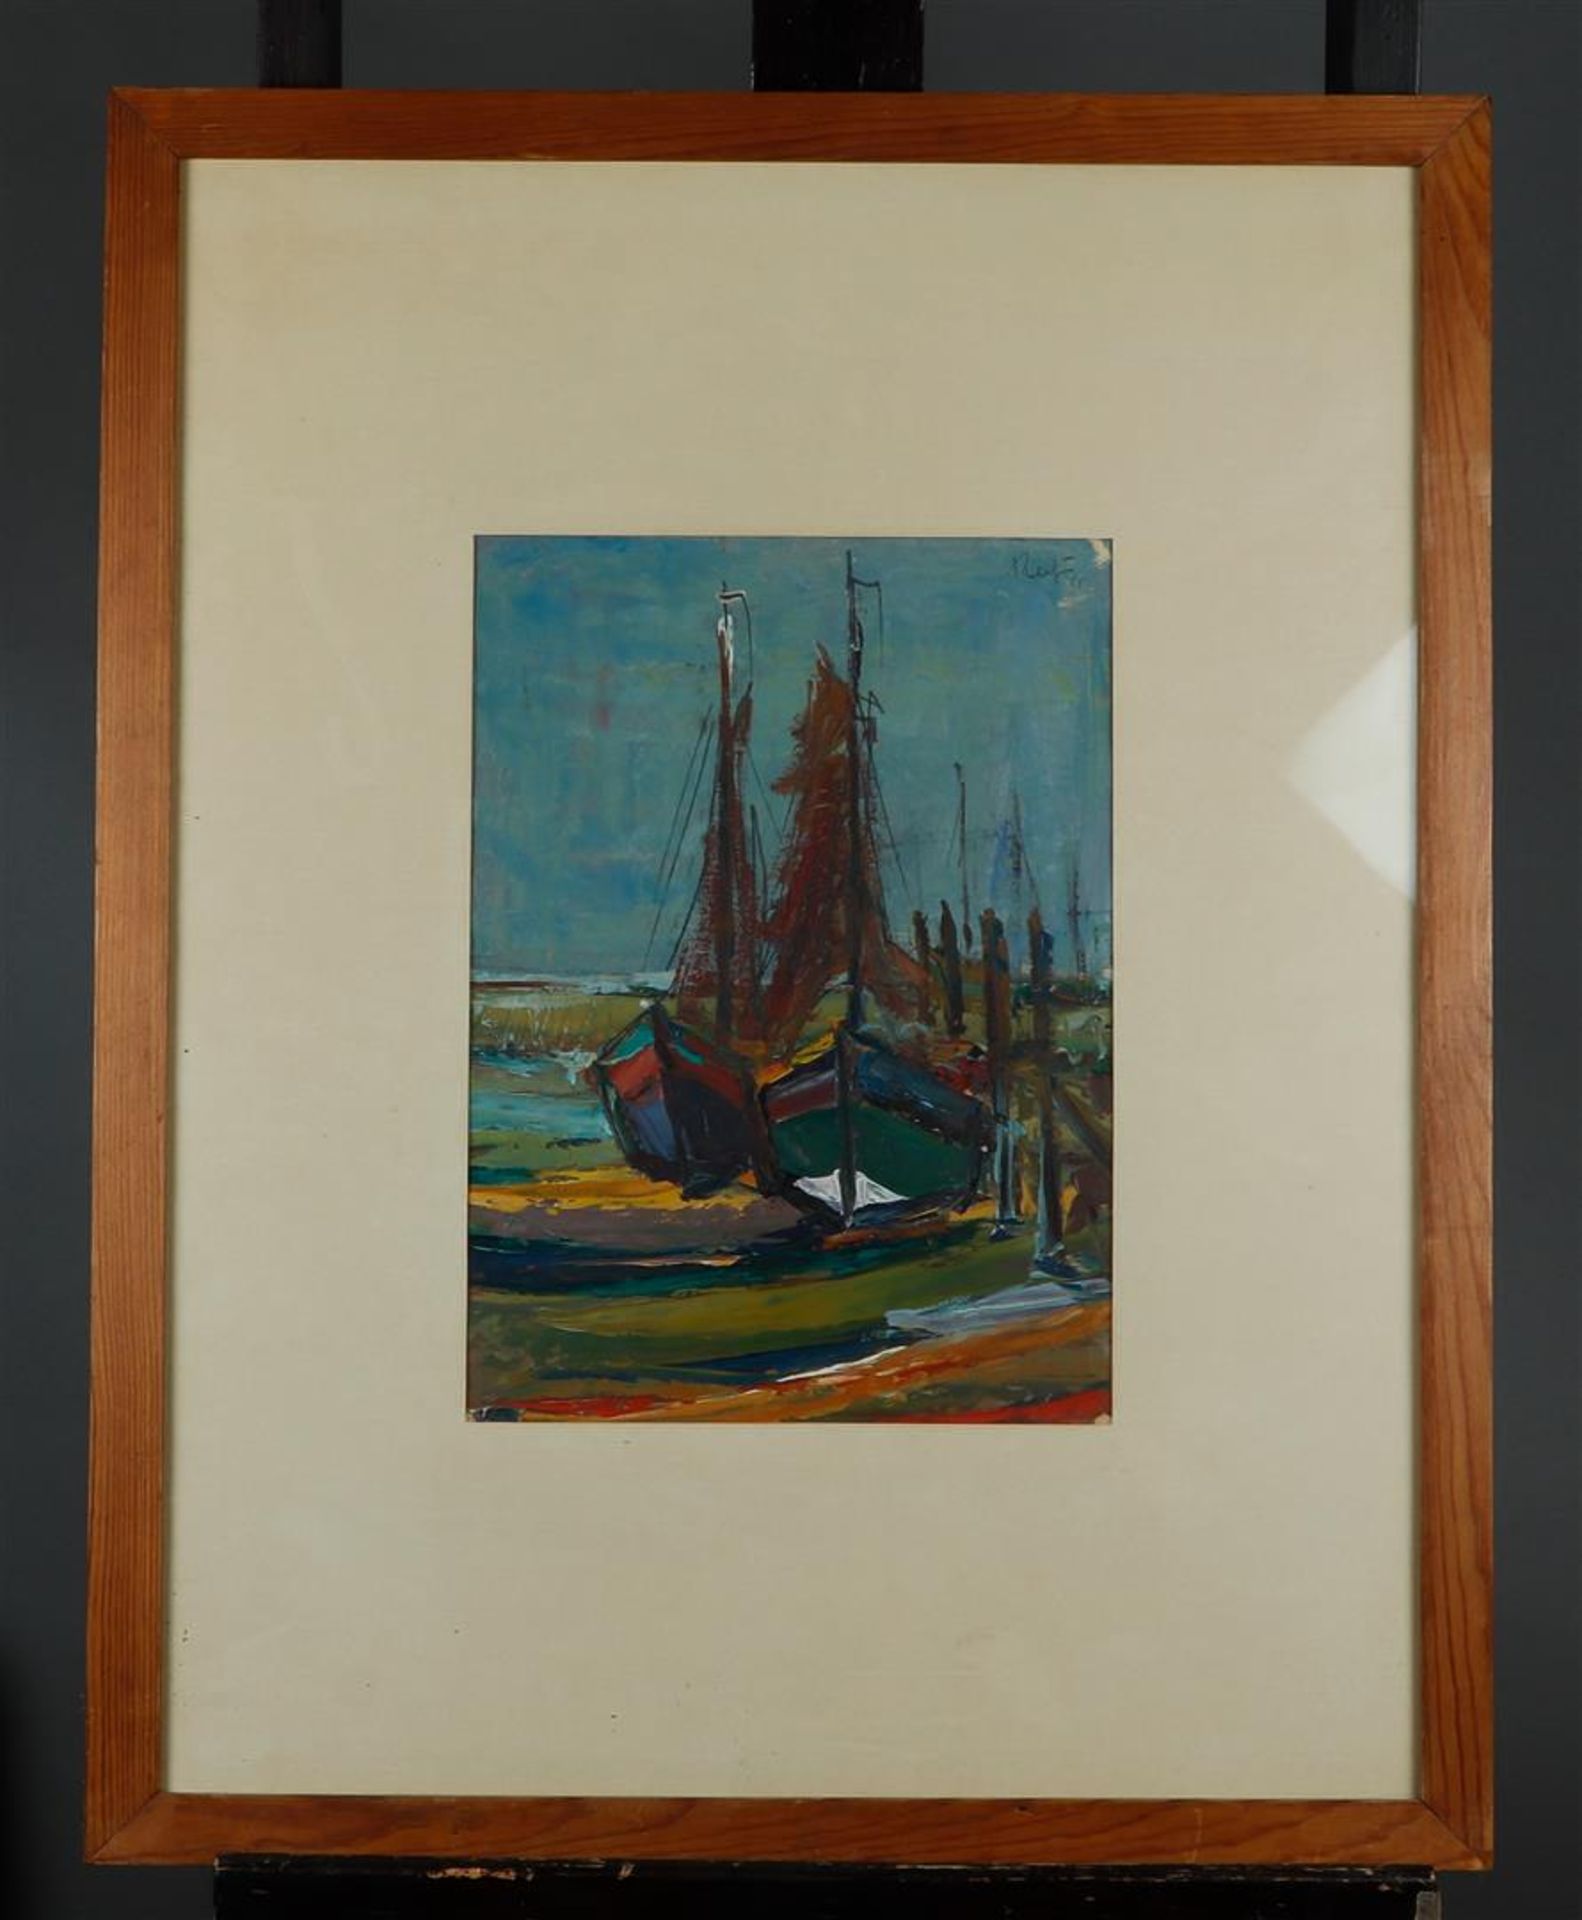 Belgian expressionist, ca. 1950 - 1960, Fishing ships in the harbor, signed "Reyniers" (top right),  - Image 2 of 3